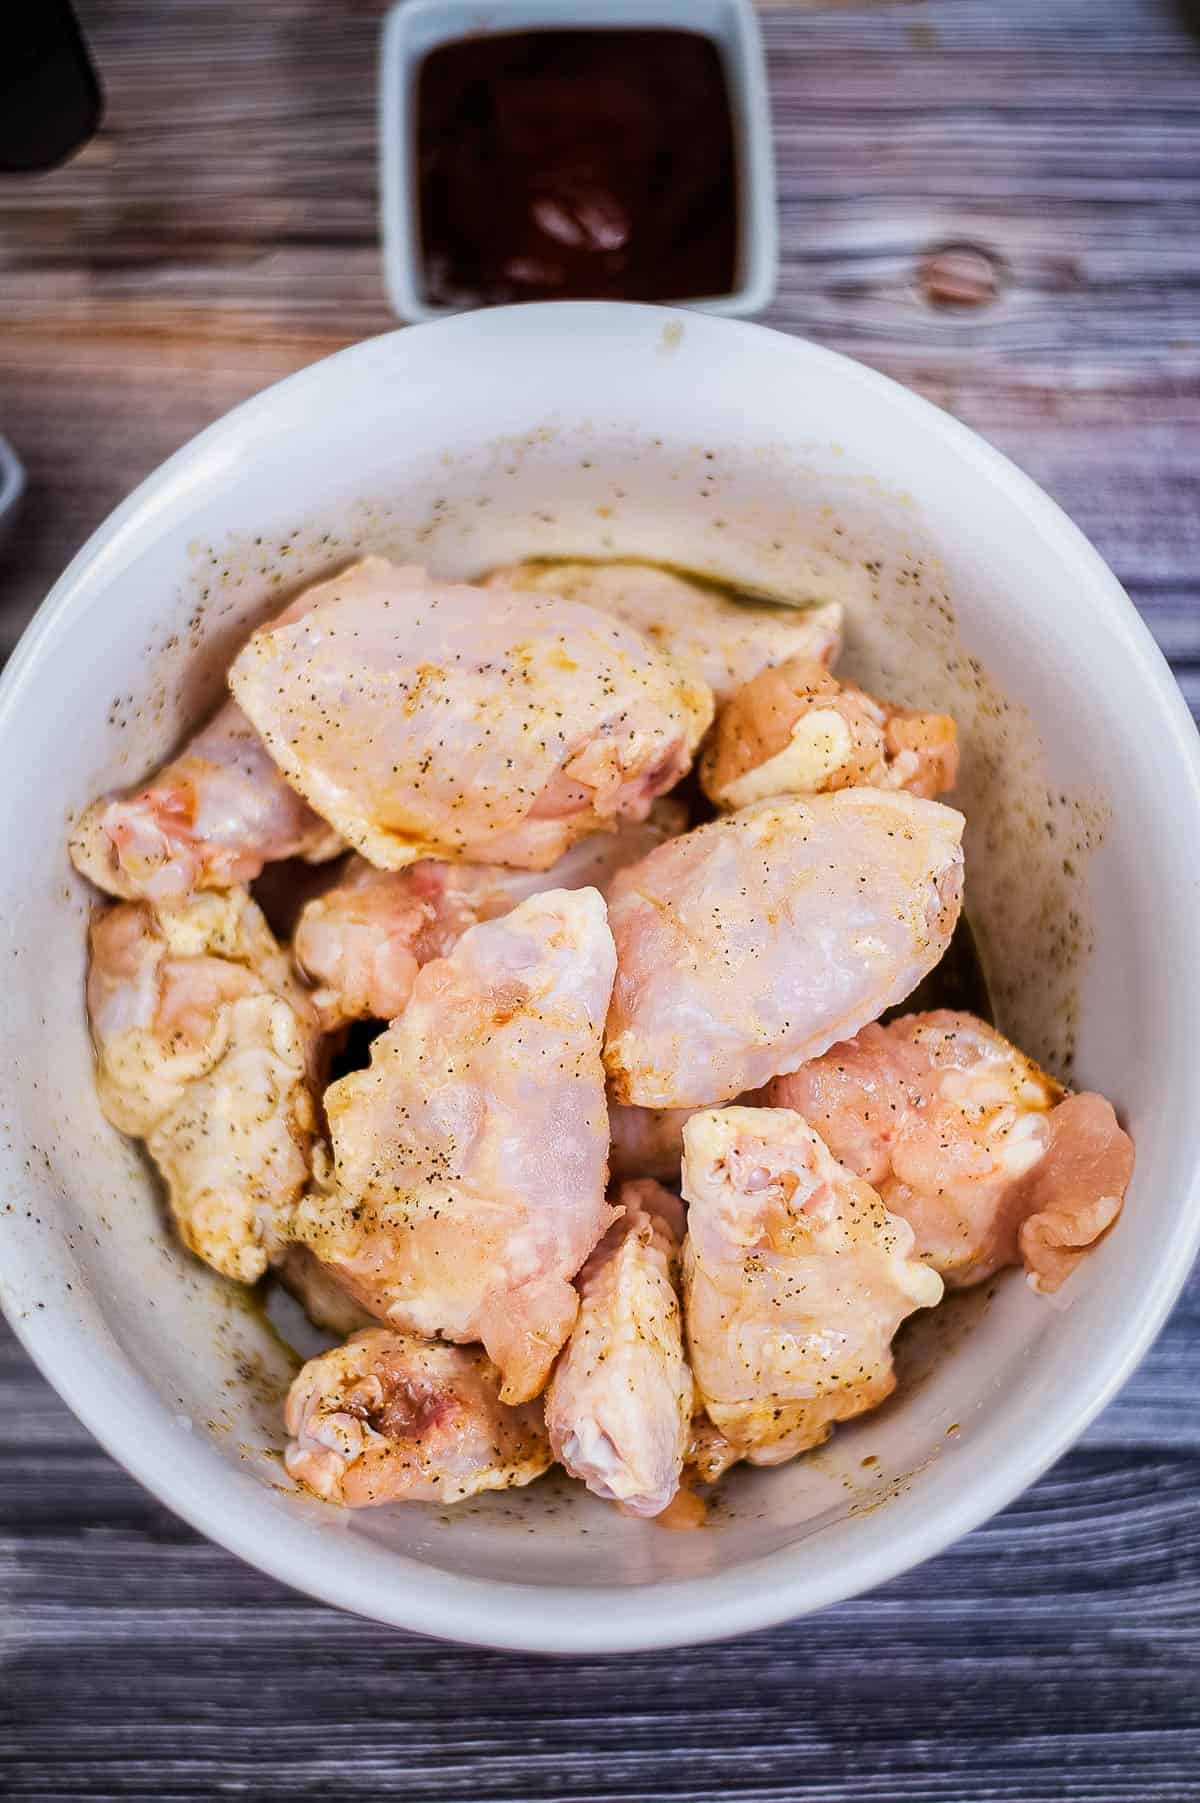 Chicken breasts on a white bowl, air fried and served on a wooden table.